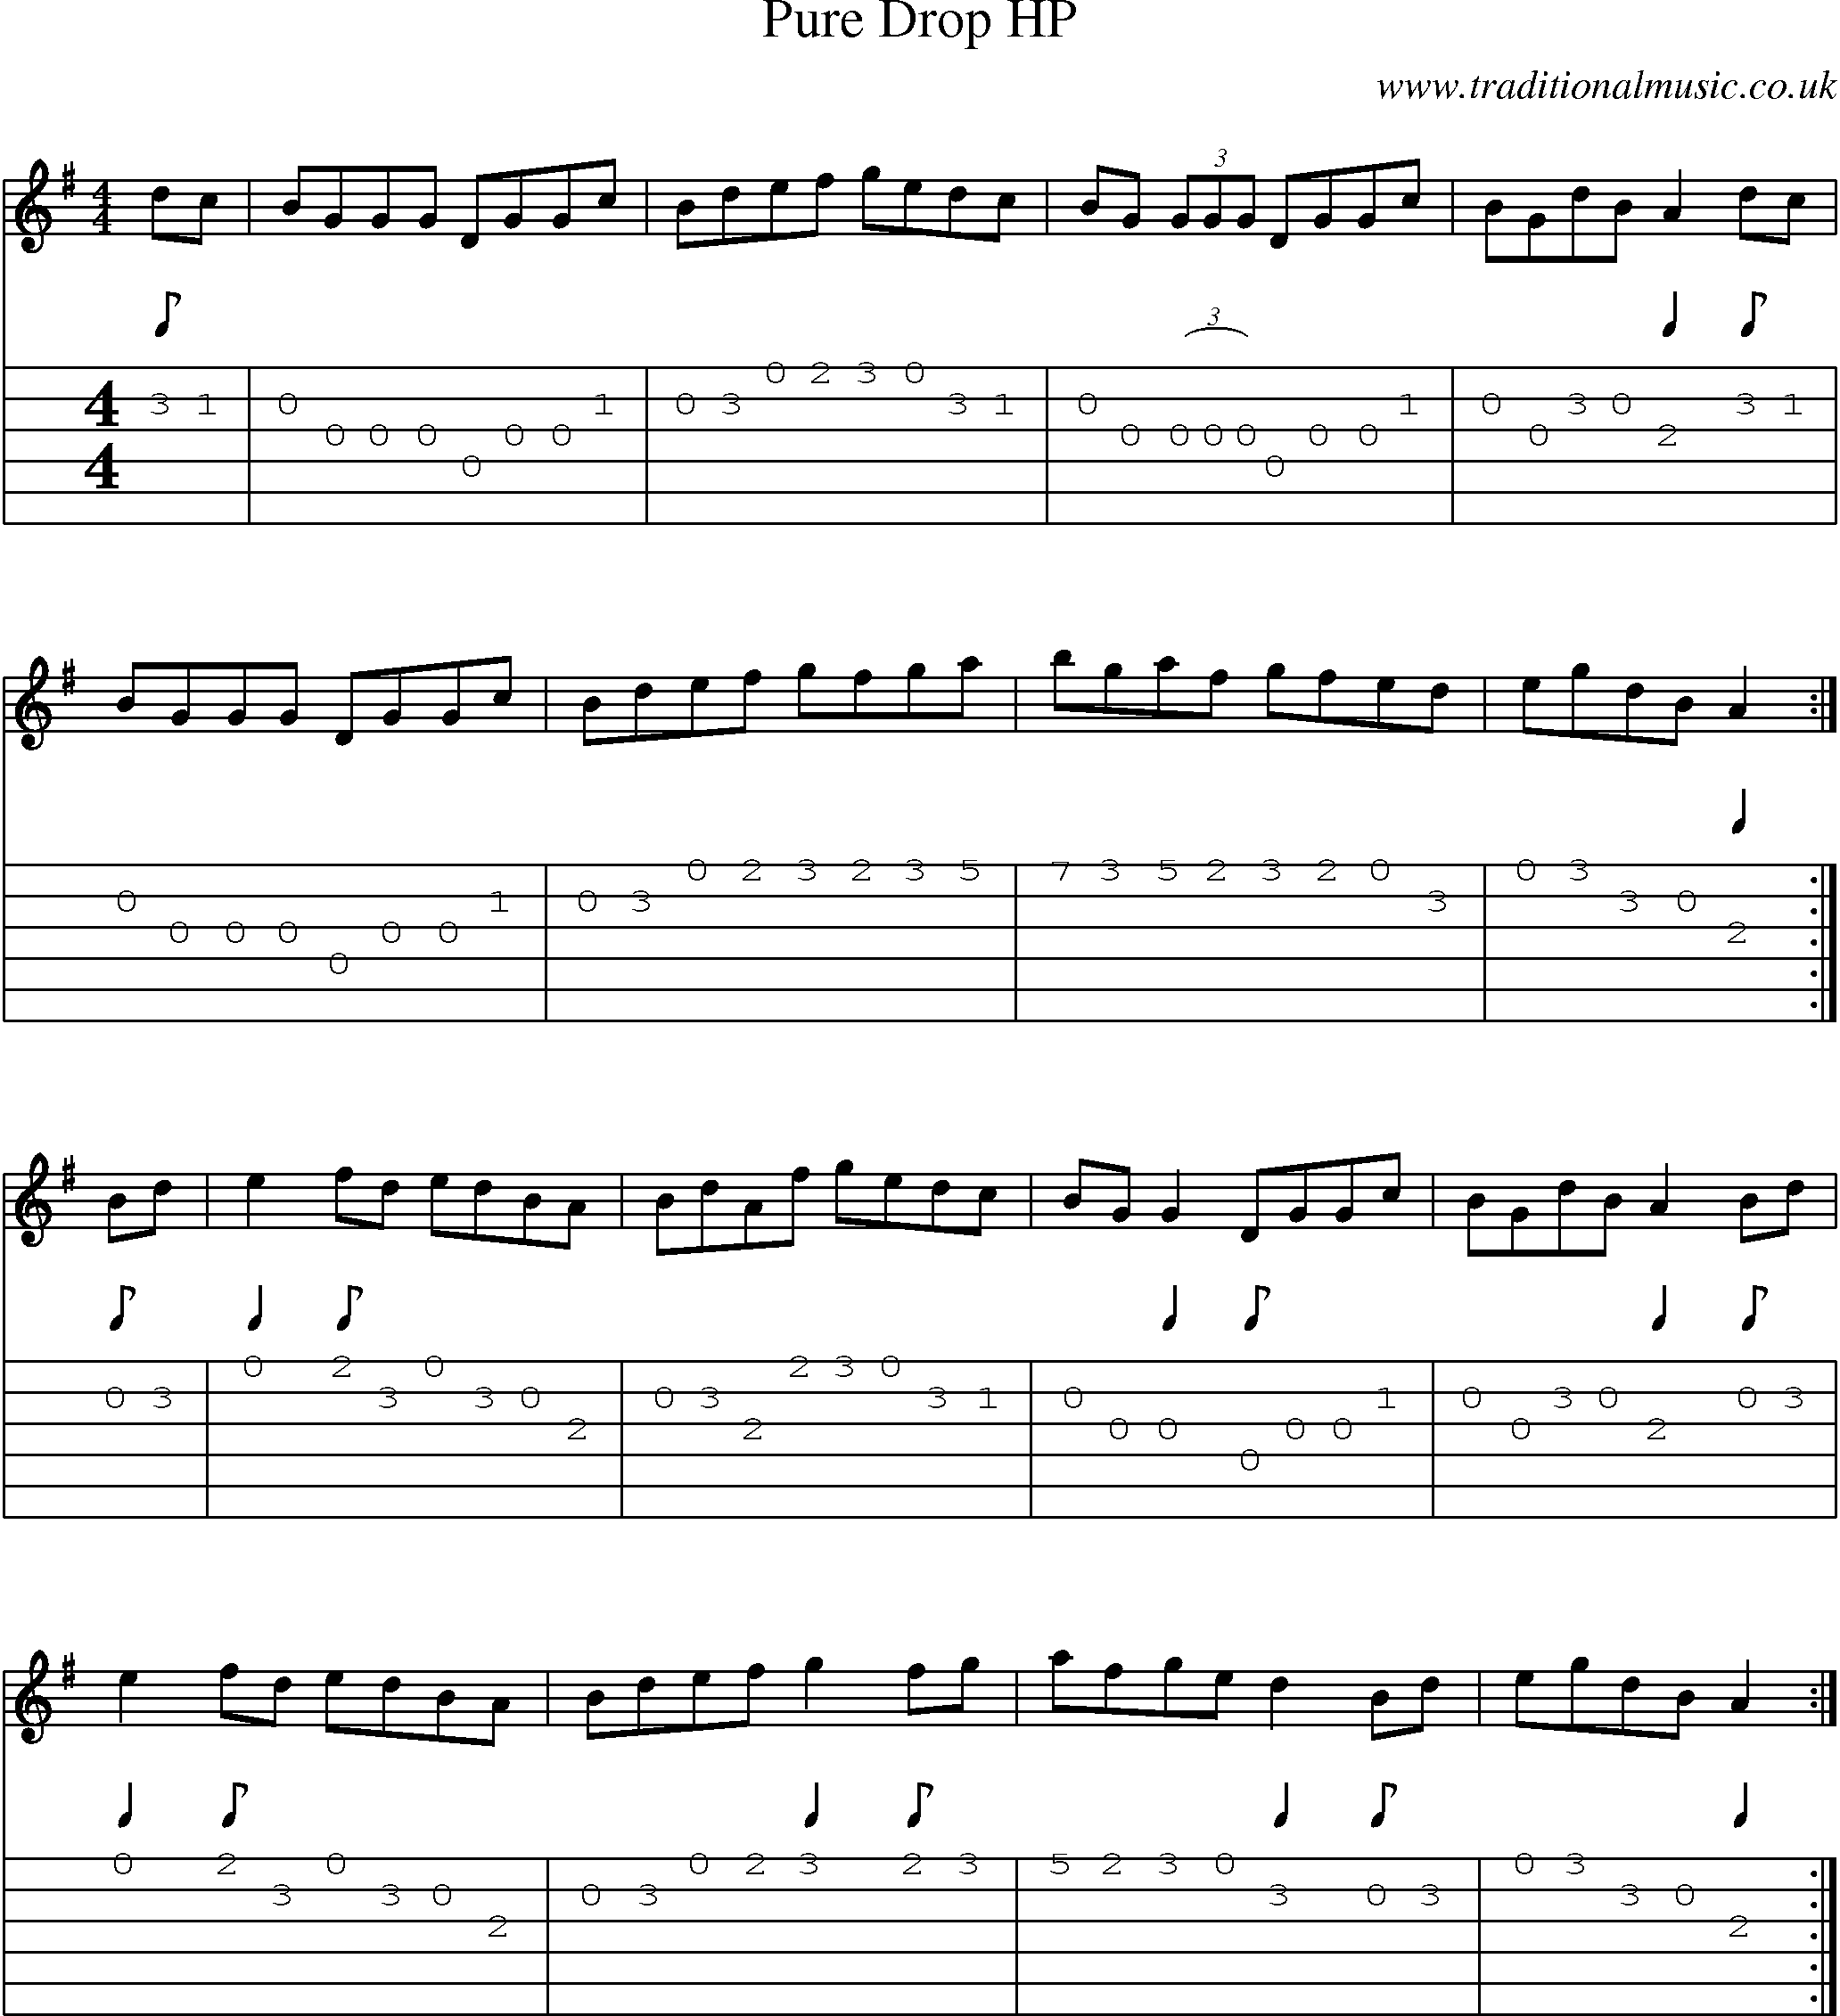 Music Score and Guitar Tabs for Pure Drop